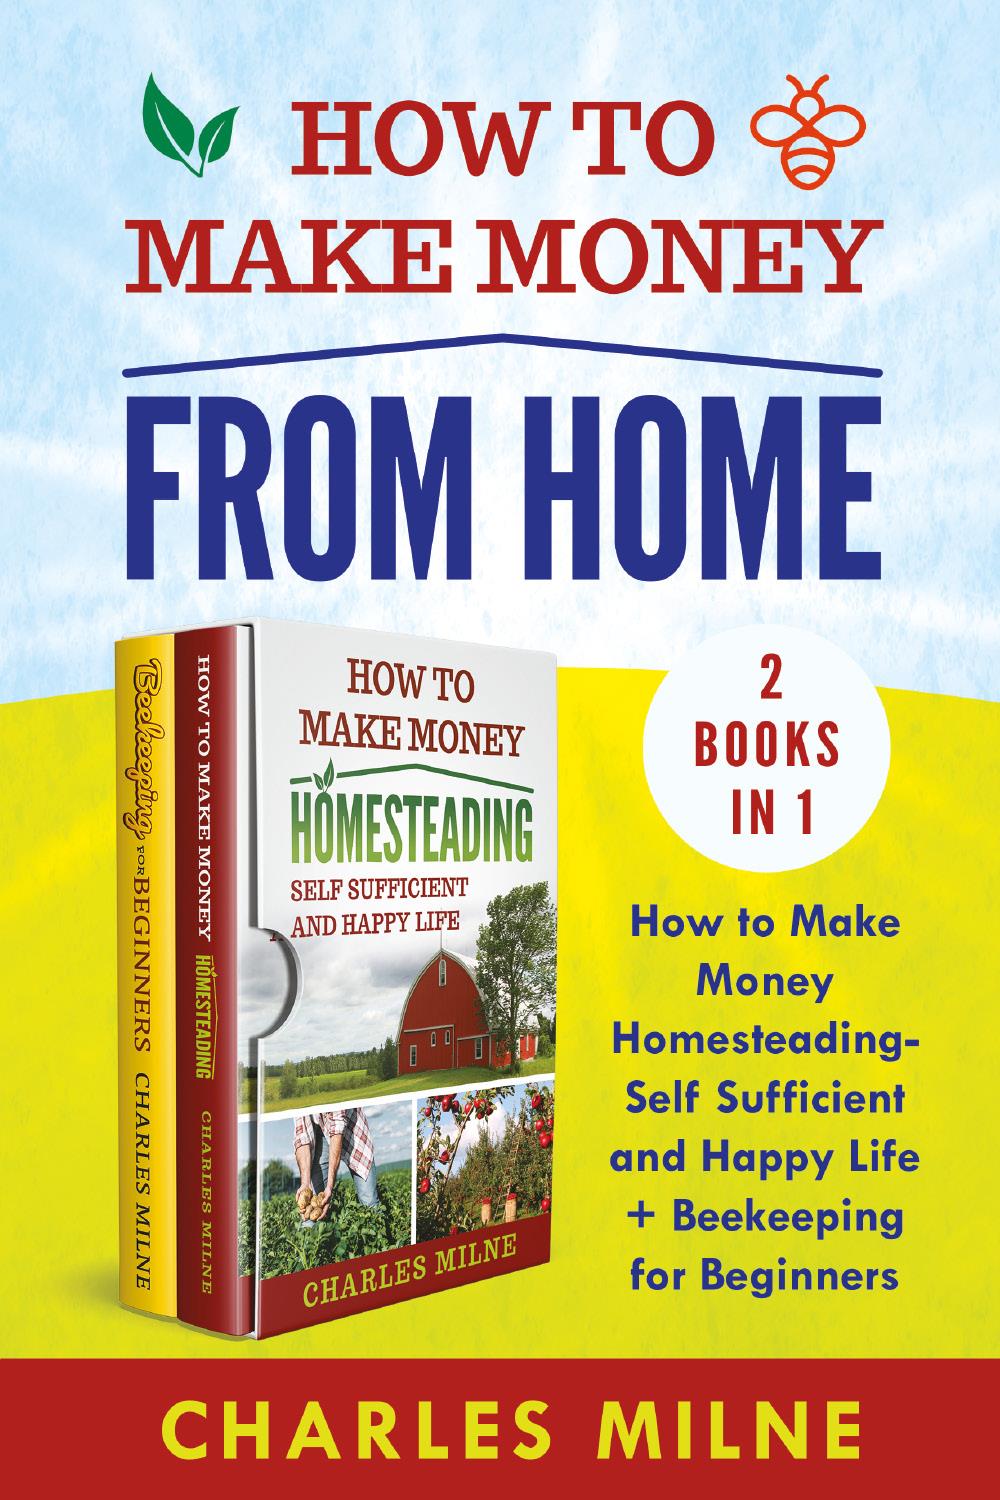 How to Make Money from Home (2 Books in 1). How to Make Money Homesteading-Self Sufficient and Happy Life + Beekeeping for Beginners